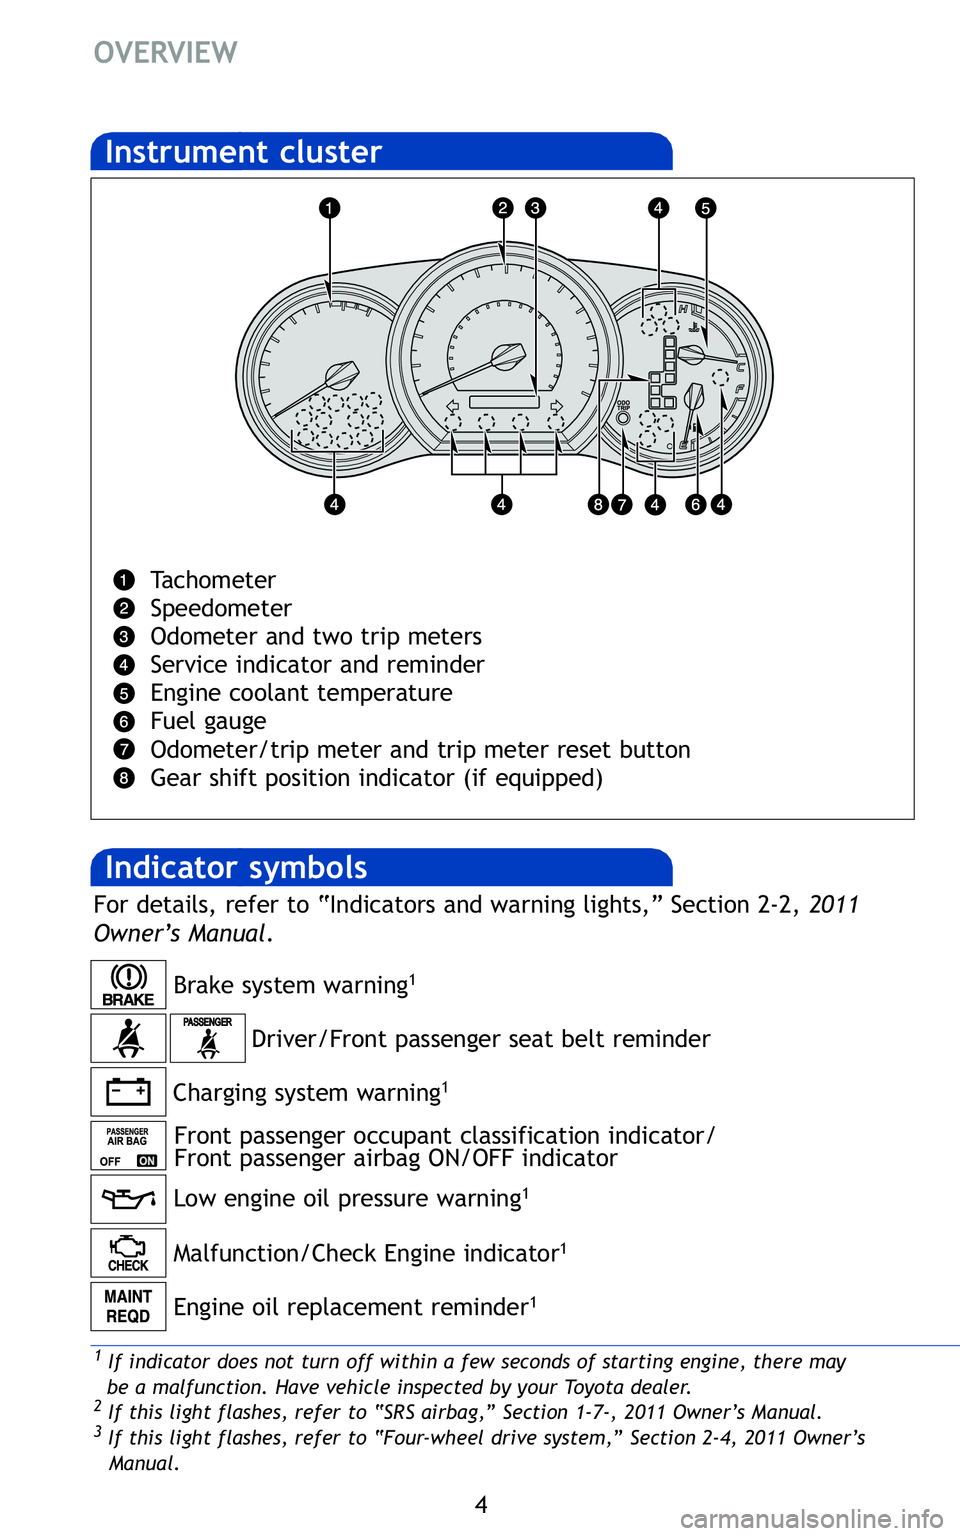 TOYOTA TACOMA 2011  Owners Manual (in English) 4
OVERVIEW
Tachometer
Speedometer
Odometer and two trip meters
Service indicator and reminder 
Engine coolant temperature 
Fuel gauge
Odometer/trip meter and trip meter reset button   
Gear shift posi